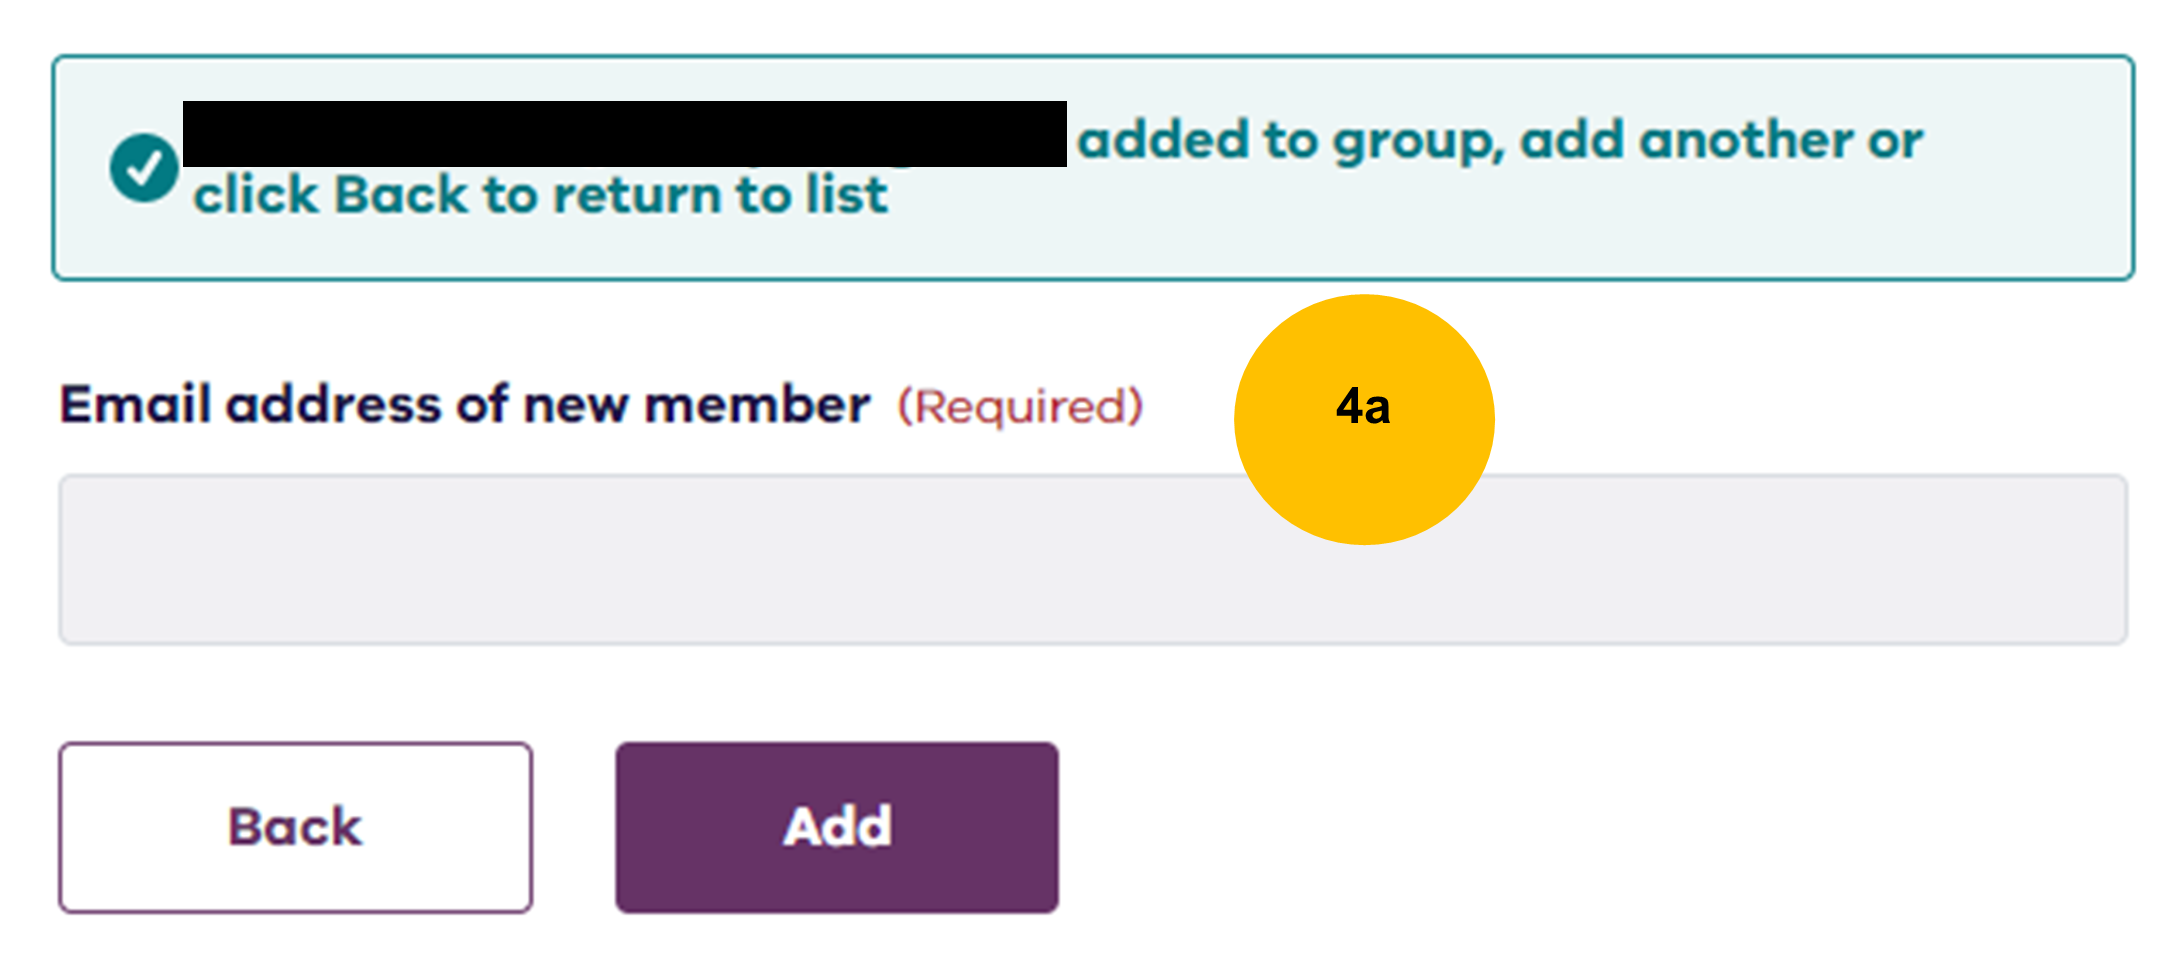 Confirmation message received when member exists in the ATS Tracking system with step 4a